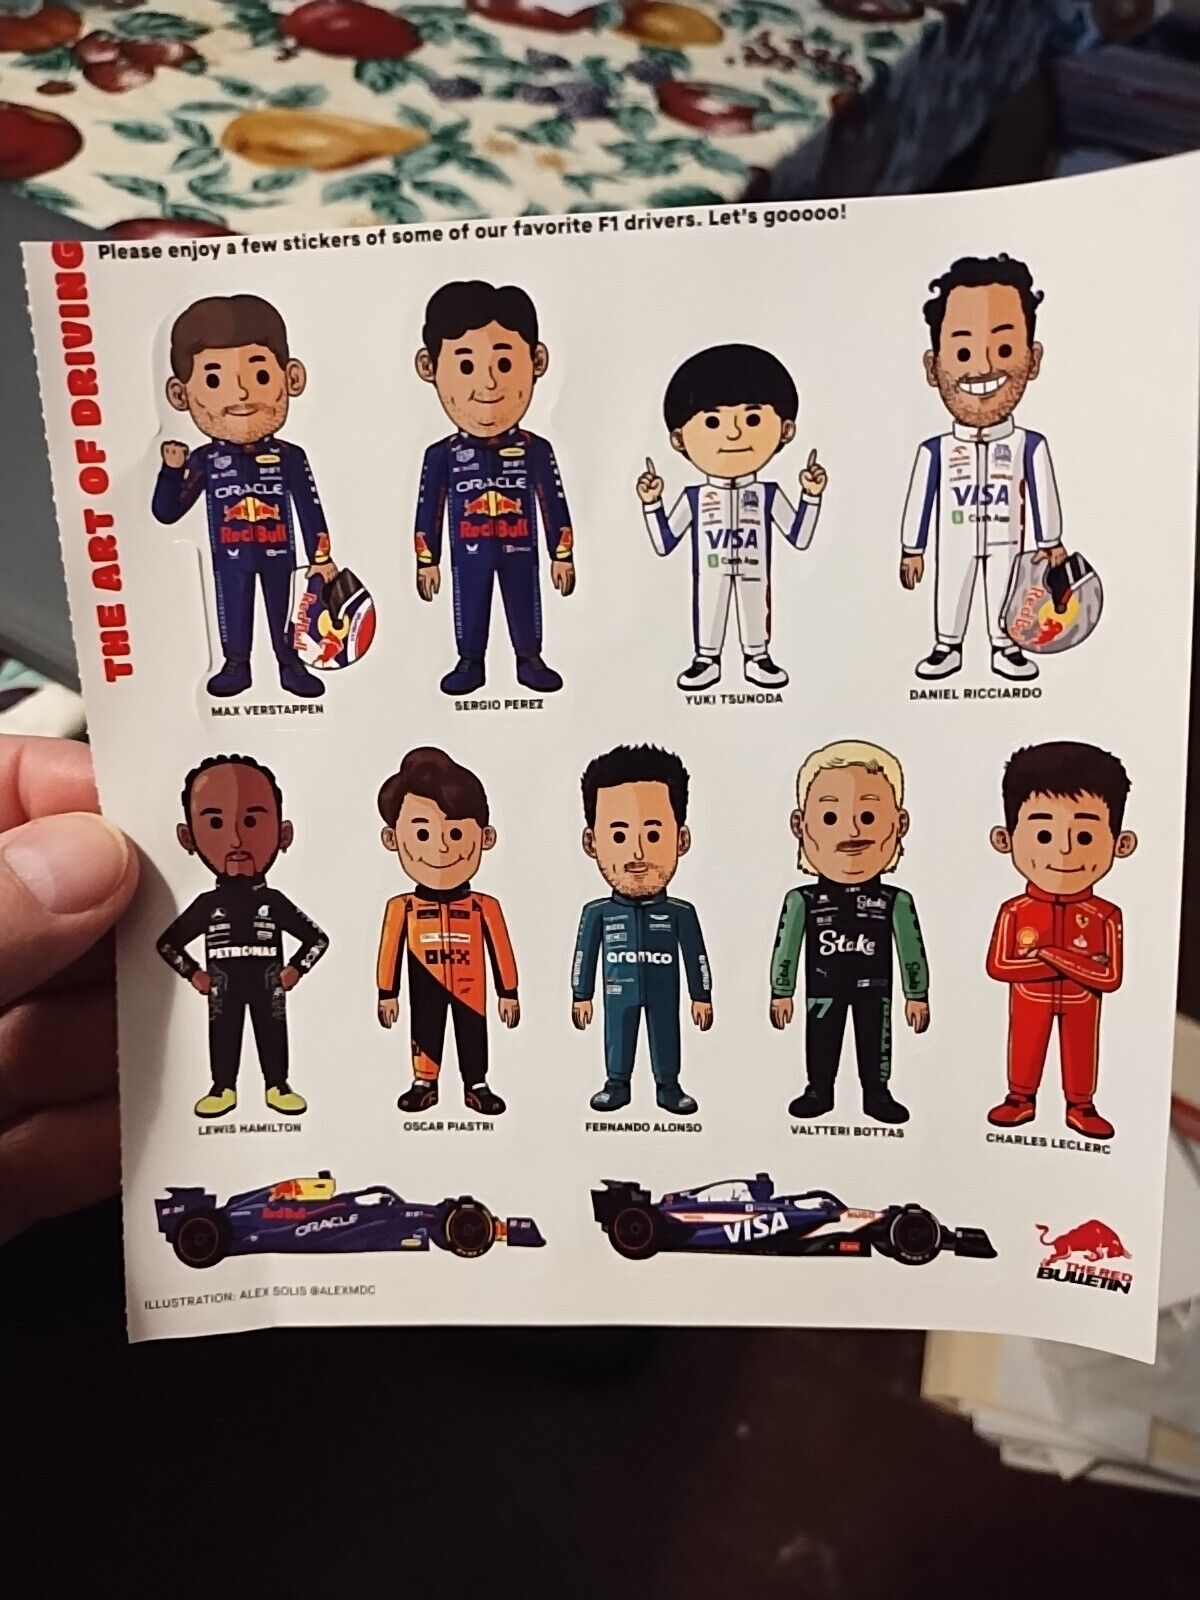 F1 Formula 1 Driver Redbull Special Stickers. Scarce and ready to ship